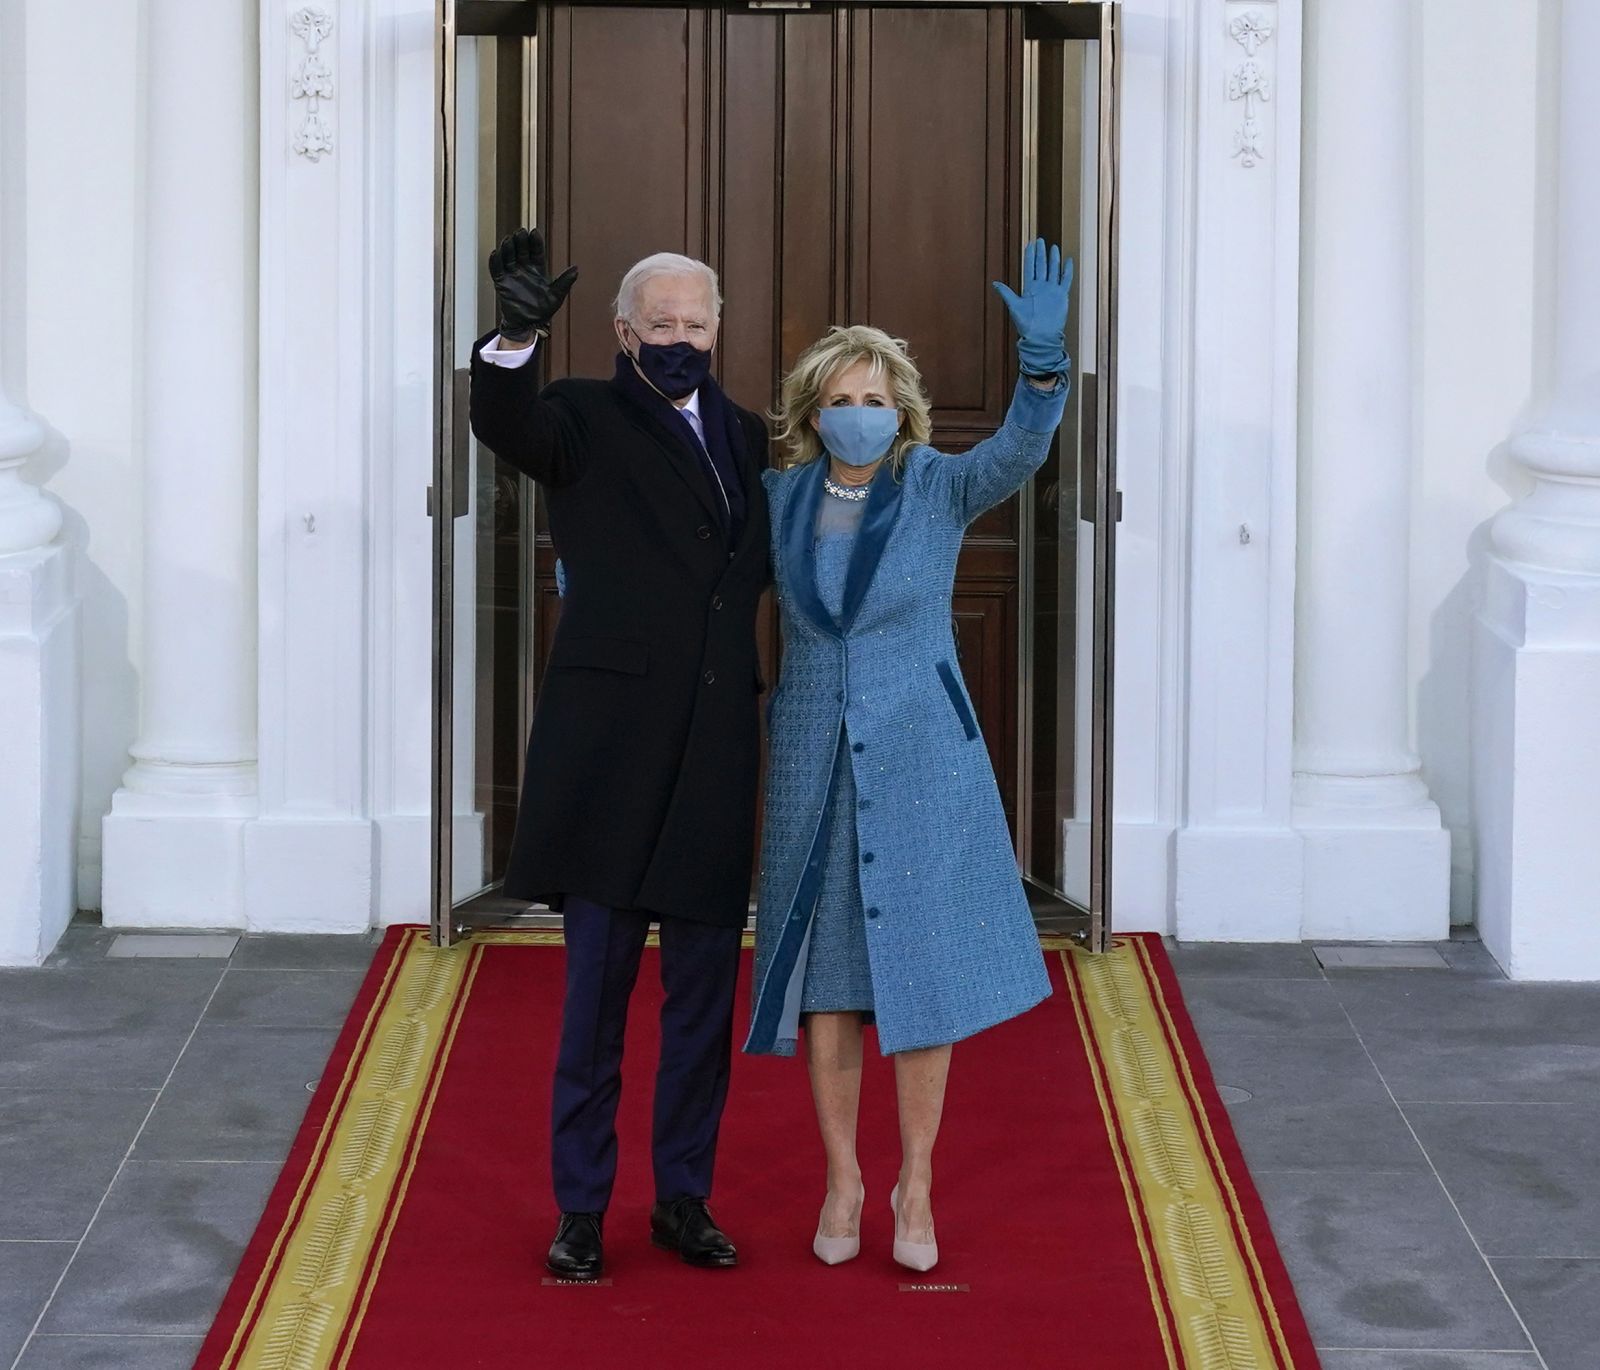 epa08954284 US President Joe Biden and first lady Jill Biden wave as they arrive at the North Portico of the White House, in Washington, DC, USA, 20 January 2021. Joe Biden was sworn in earlier on the same day and became the 46th President of the United States.  EPA/Alex Brandon / POOL